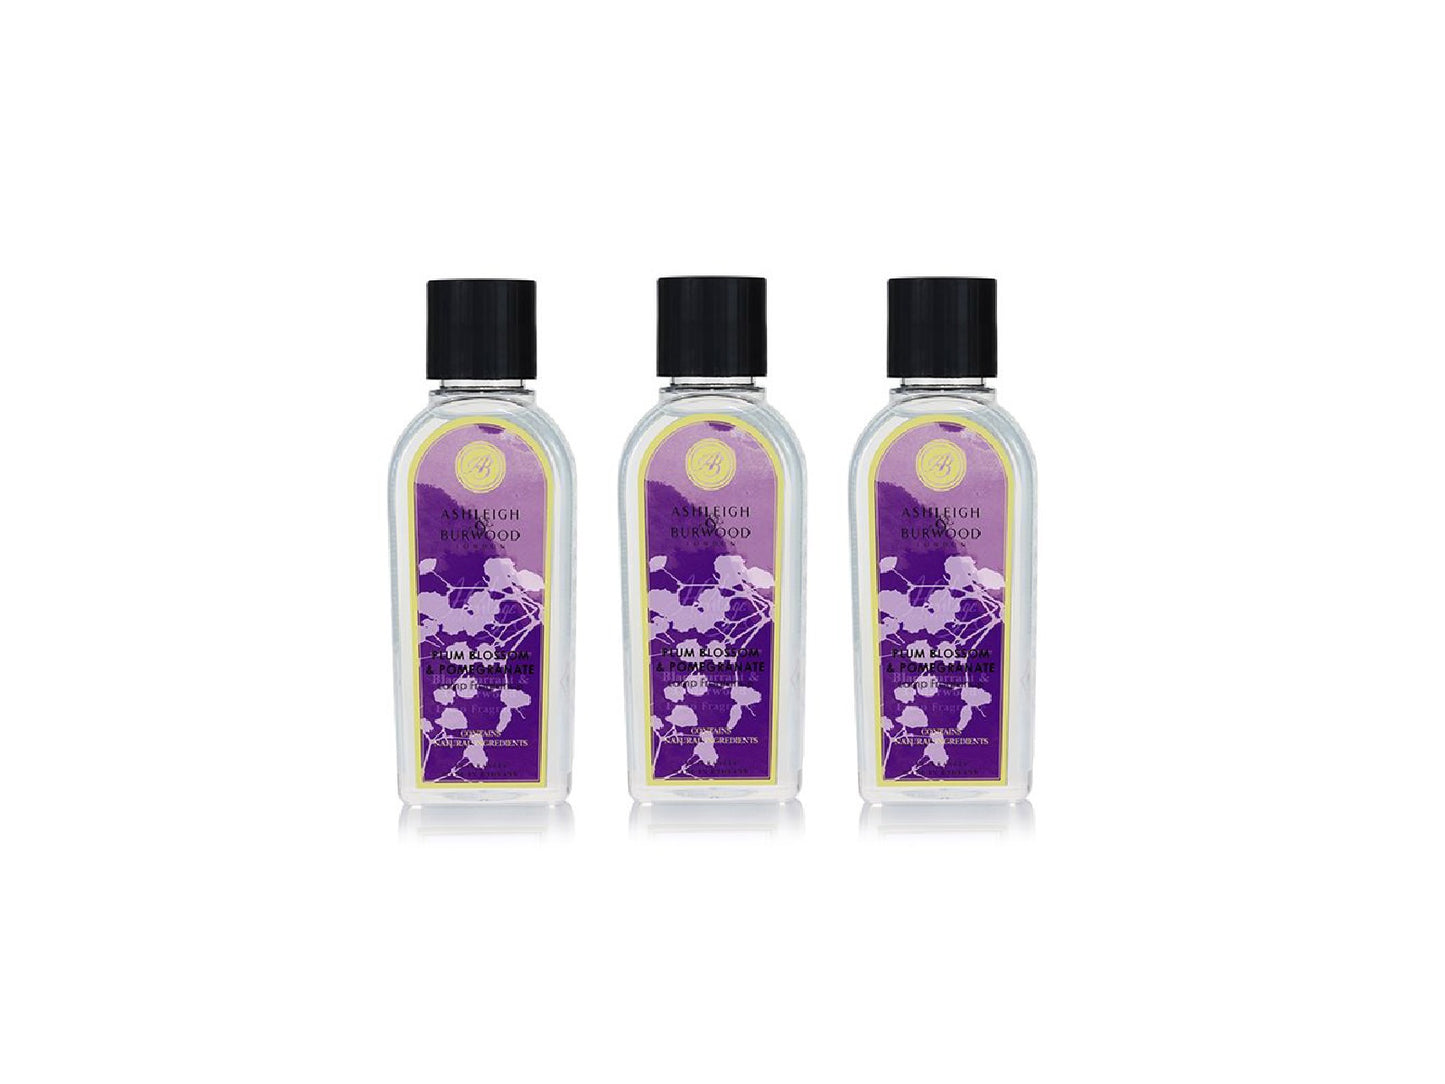 Three bottles of plum blossom and pomegranate lamp fragrance with floral purple labels, clear bottles and black caps.